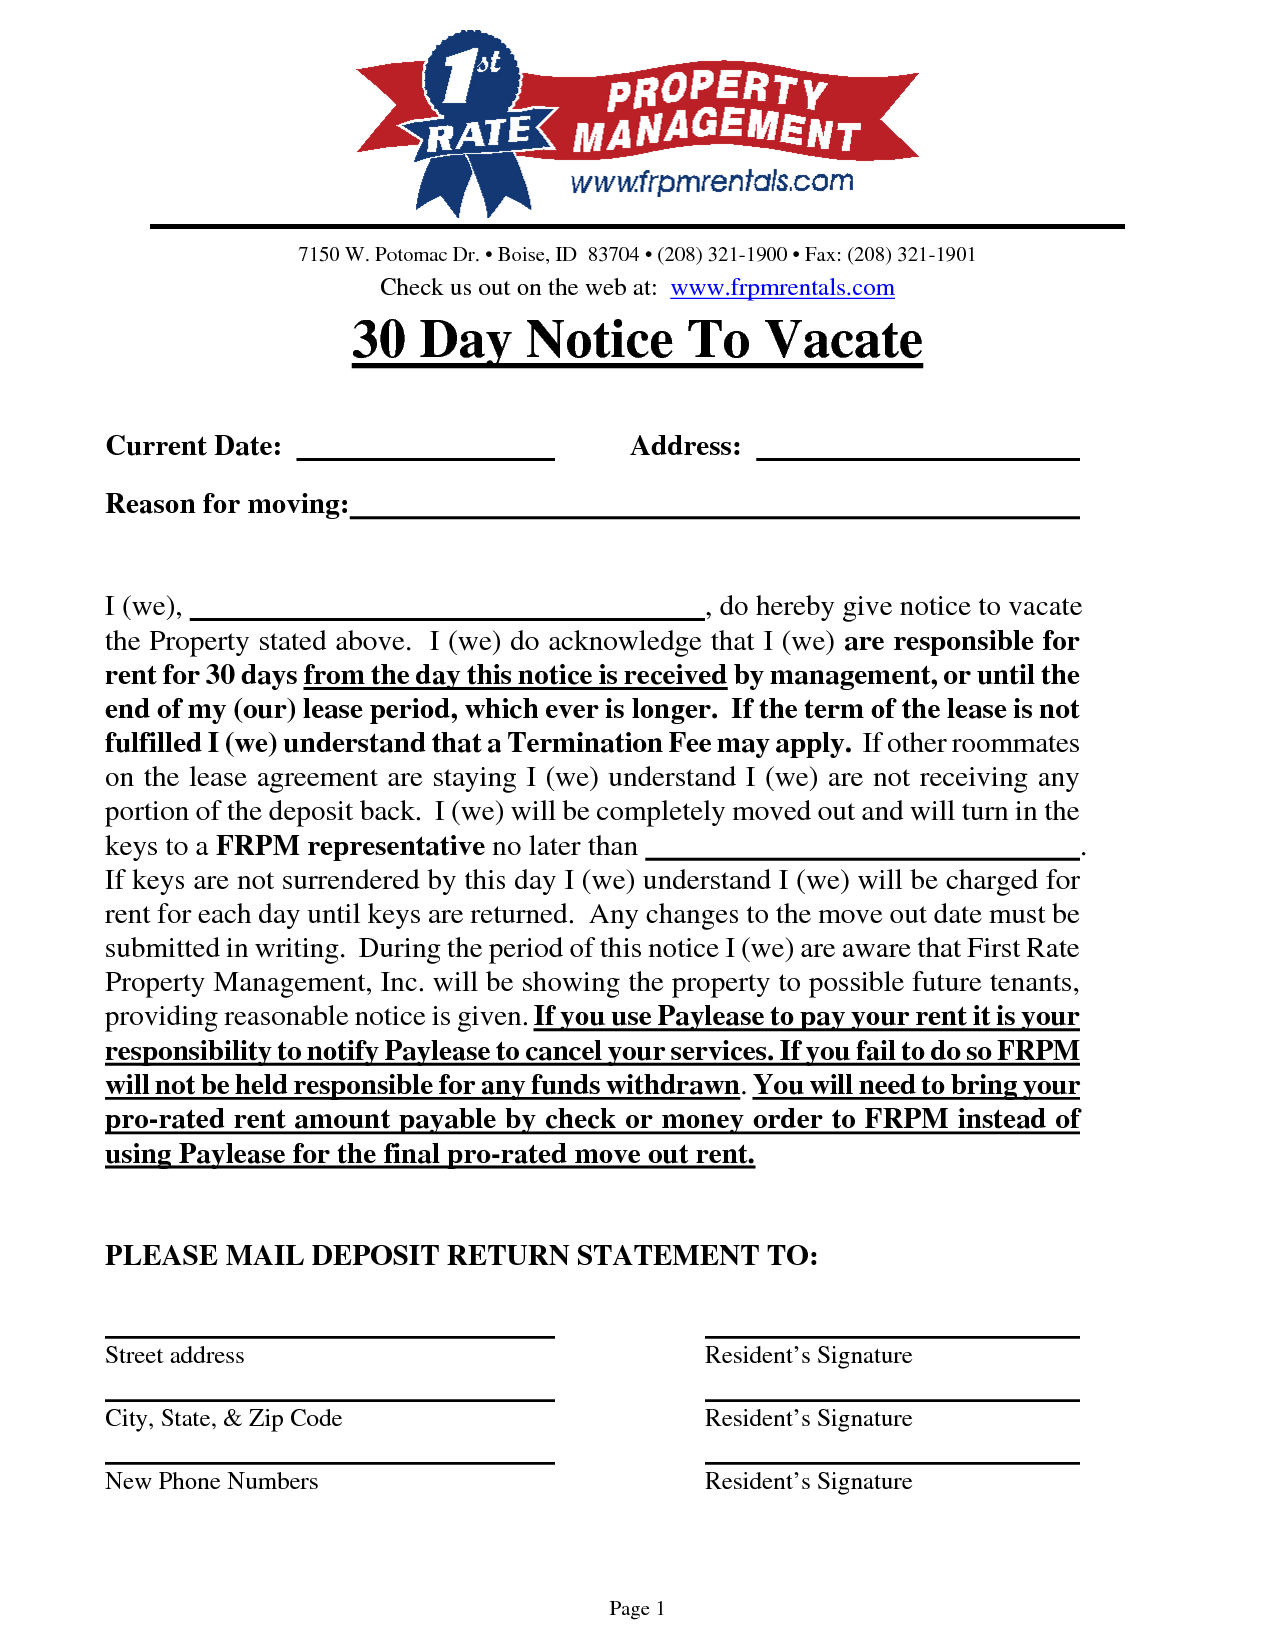 30-day-notice-to-vacate-to-tenant-free-printable-documents